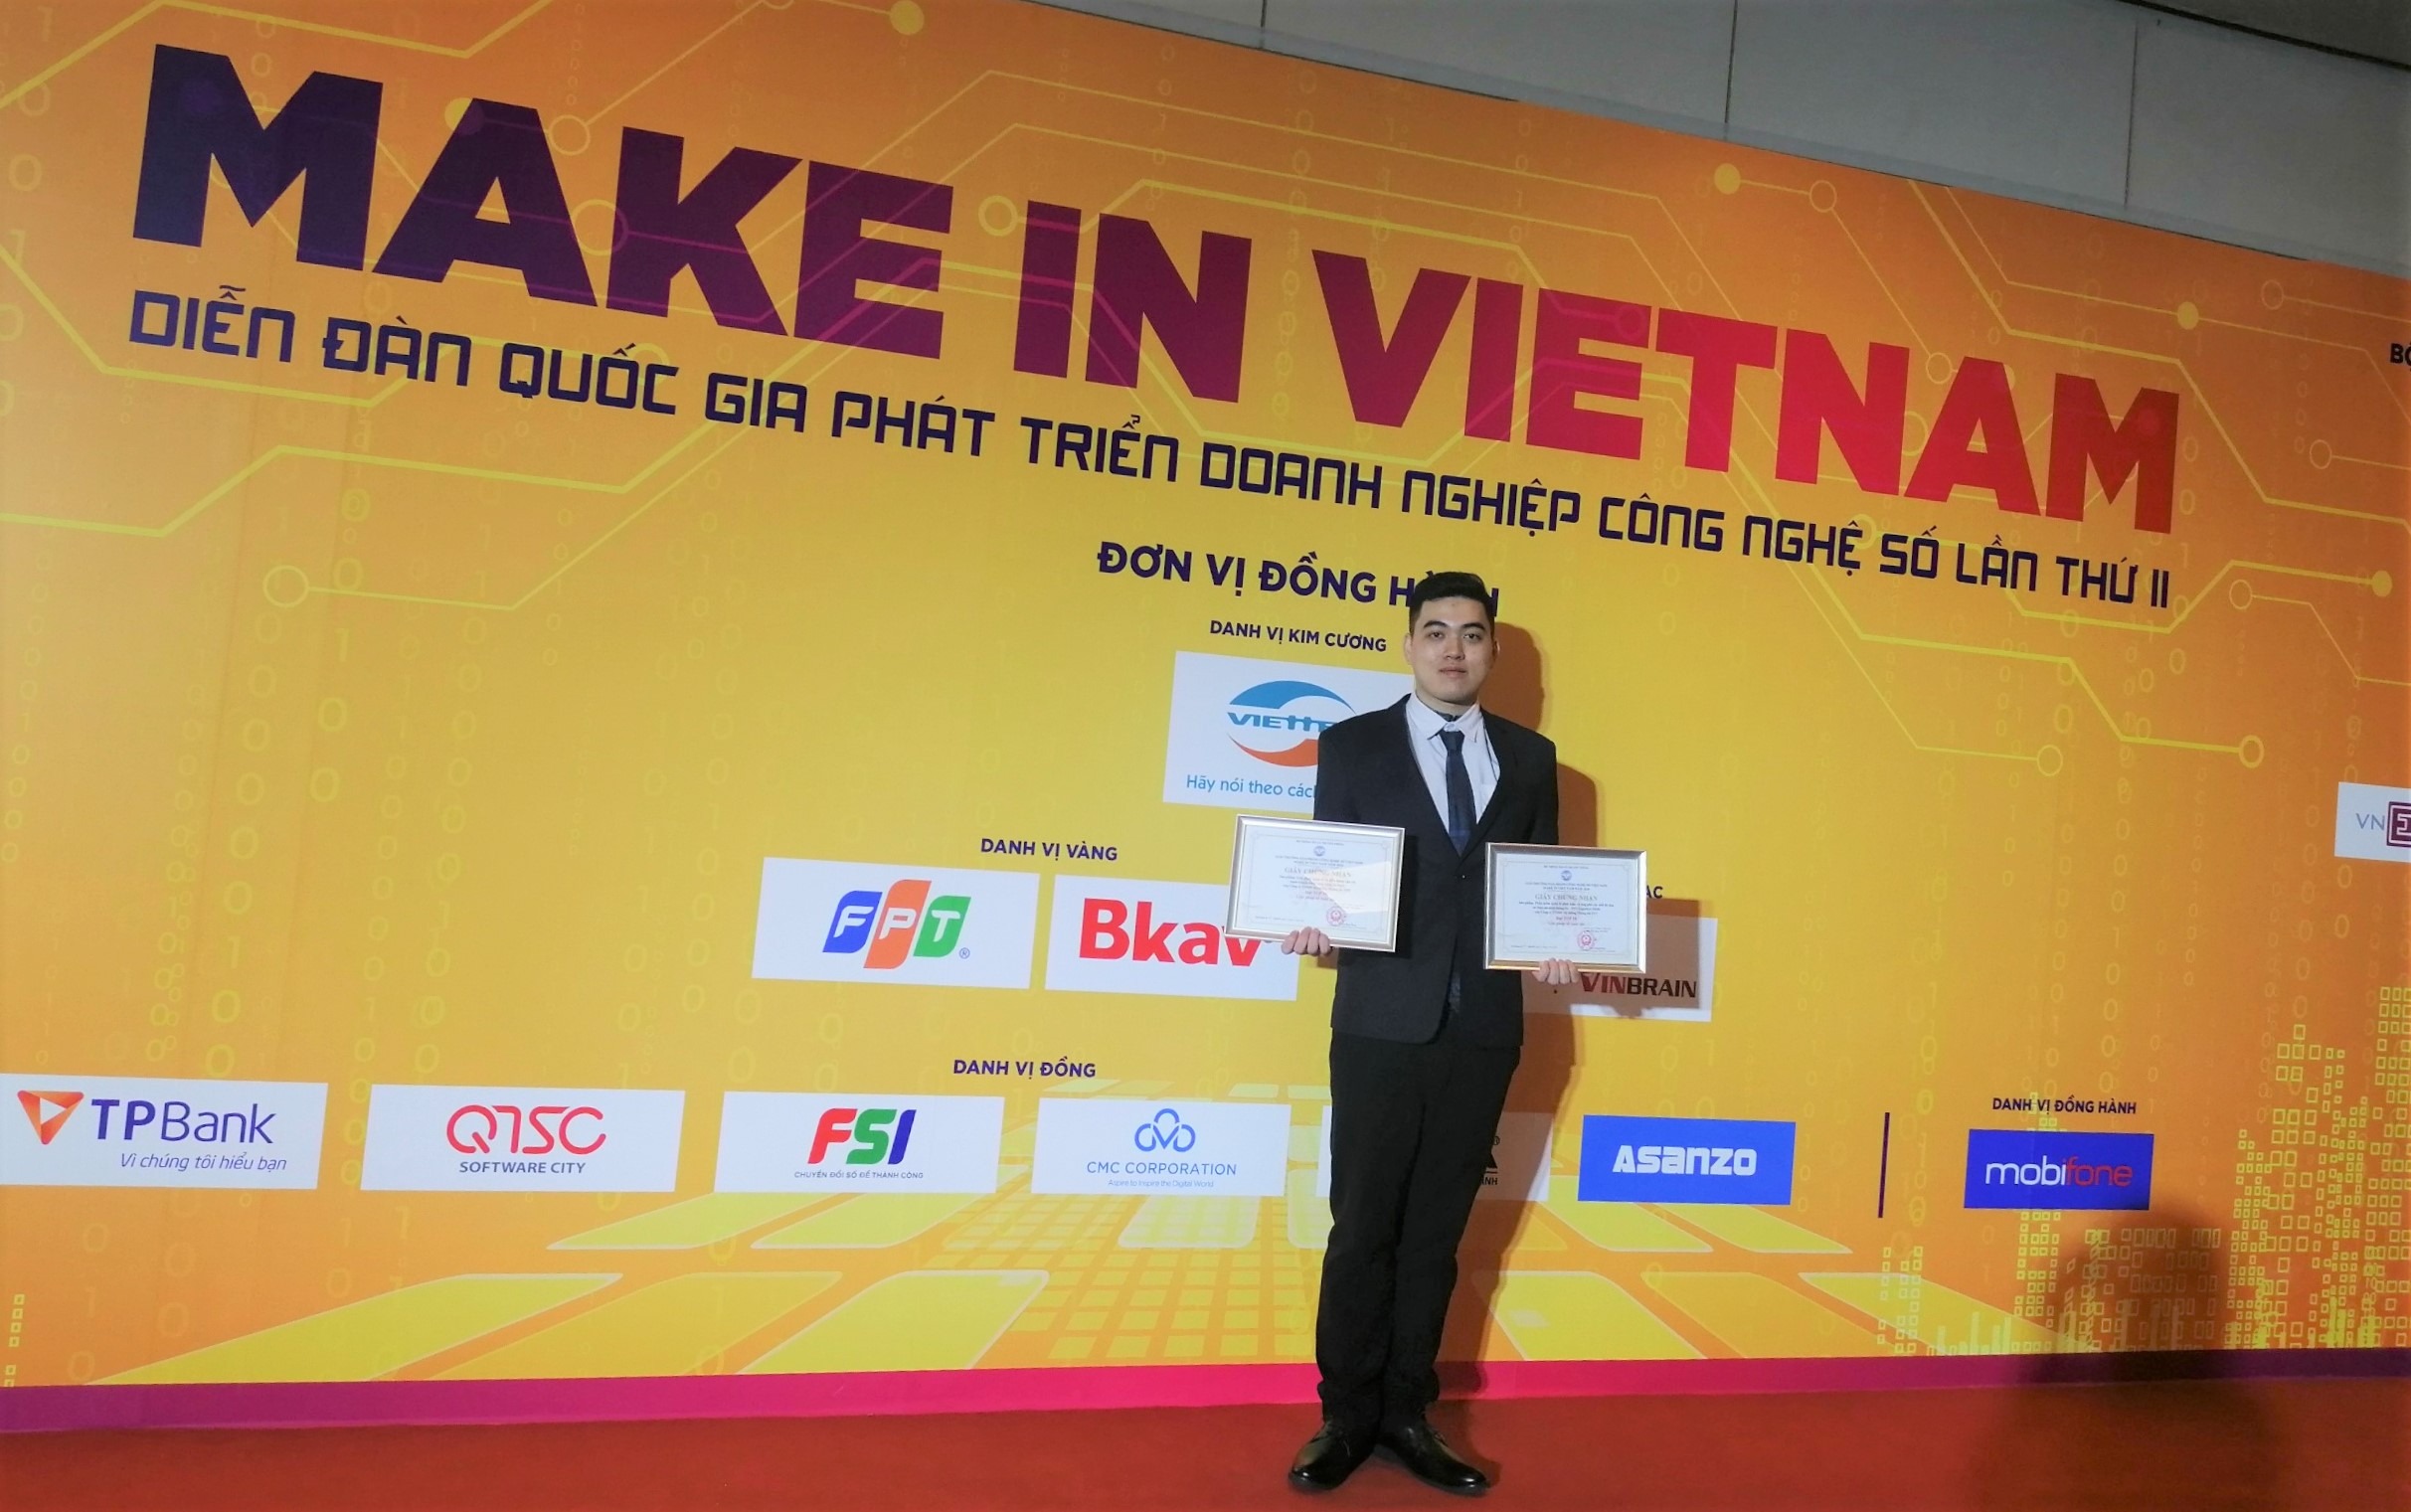 Make in Vietnam Digital Technology Product Awards 2020 – Top 10 Digital Solutions category – Managed Detection and Response Solution (FPT.EagleEye MDR)